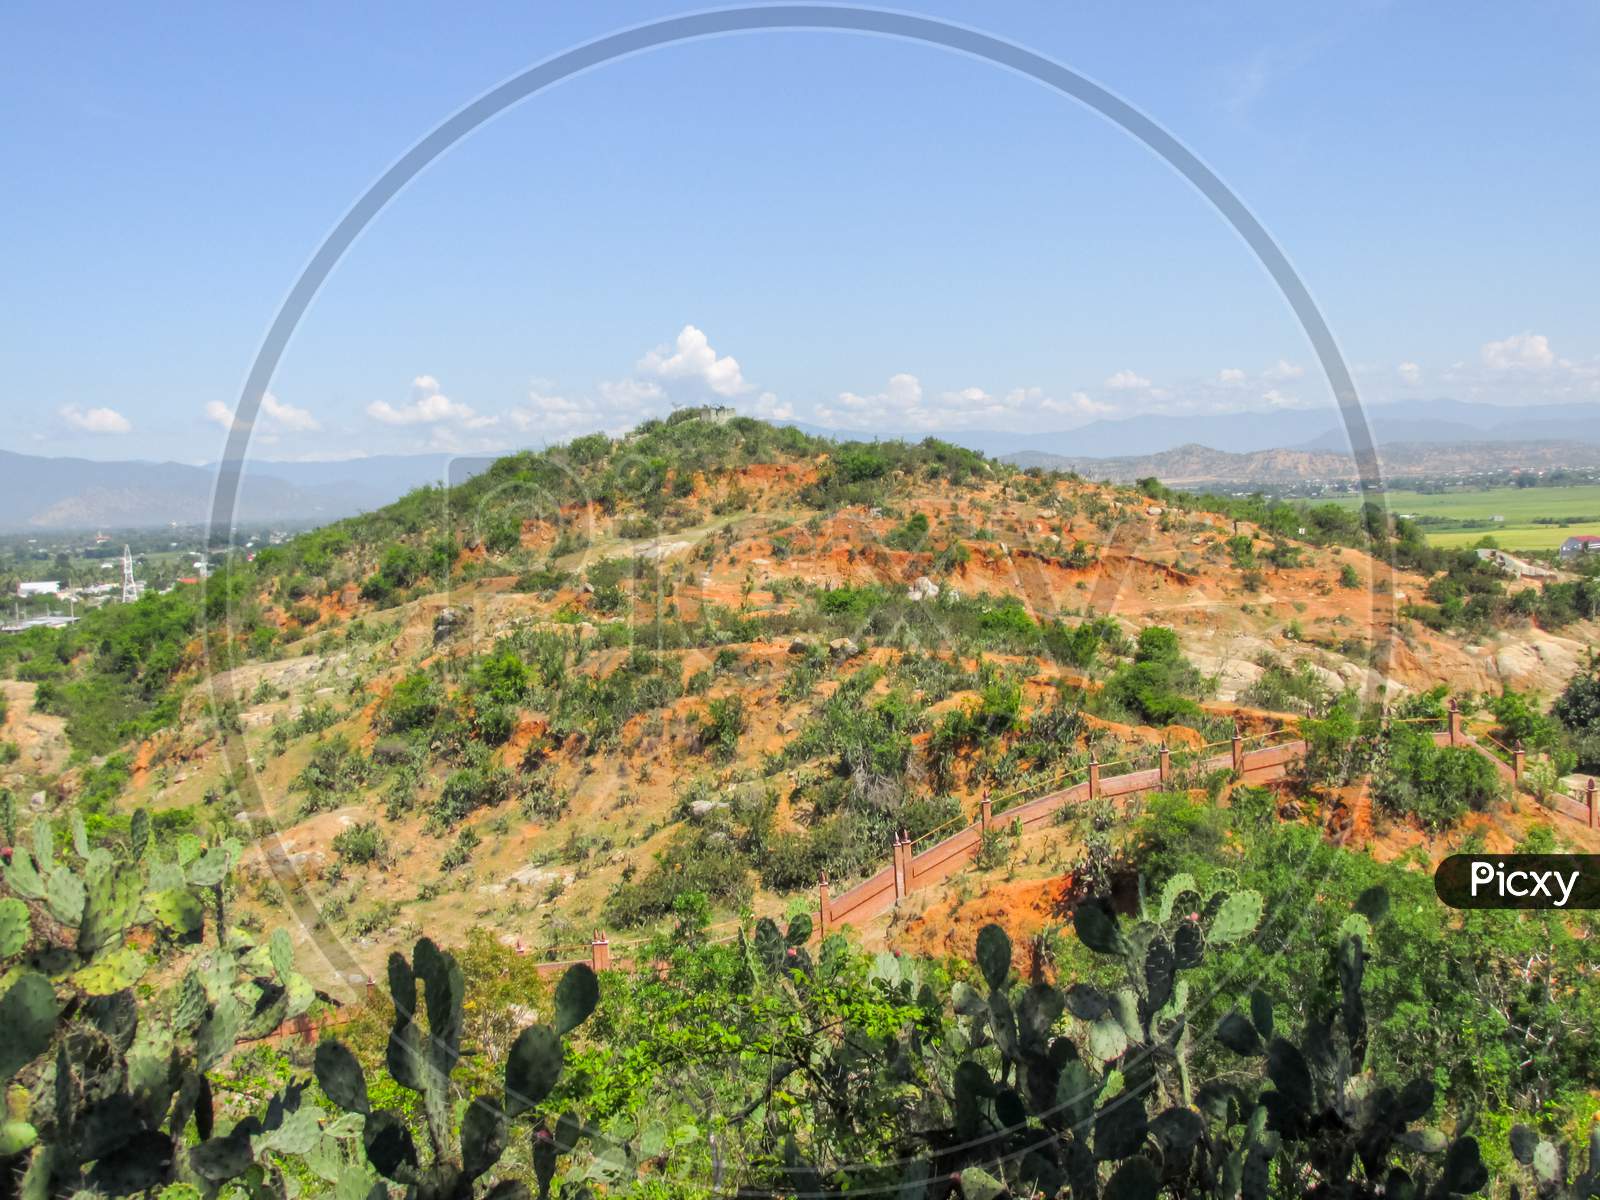 Aerial View Of The Mountain With Red Soil And Cactus